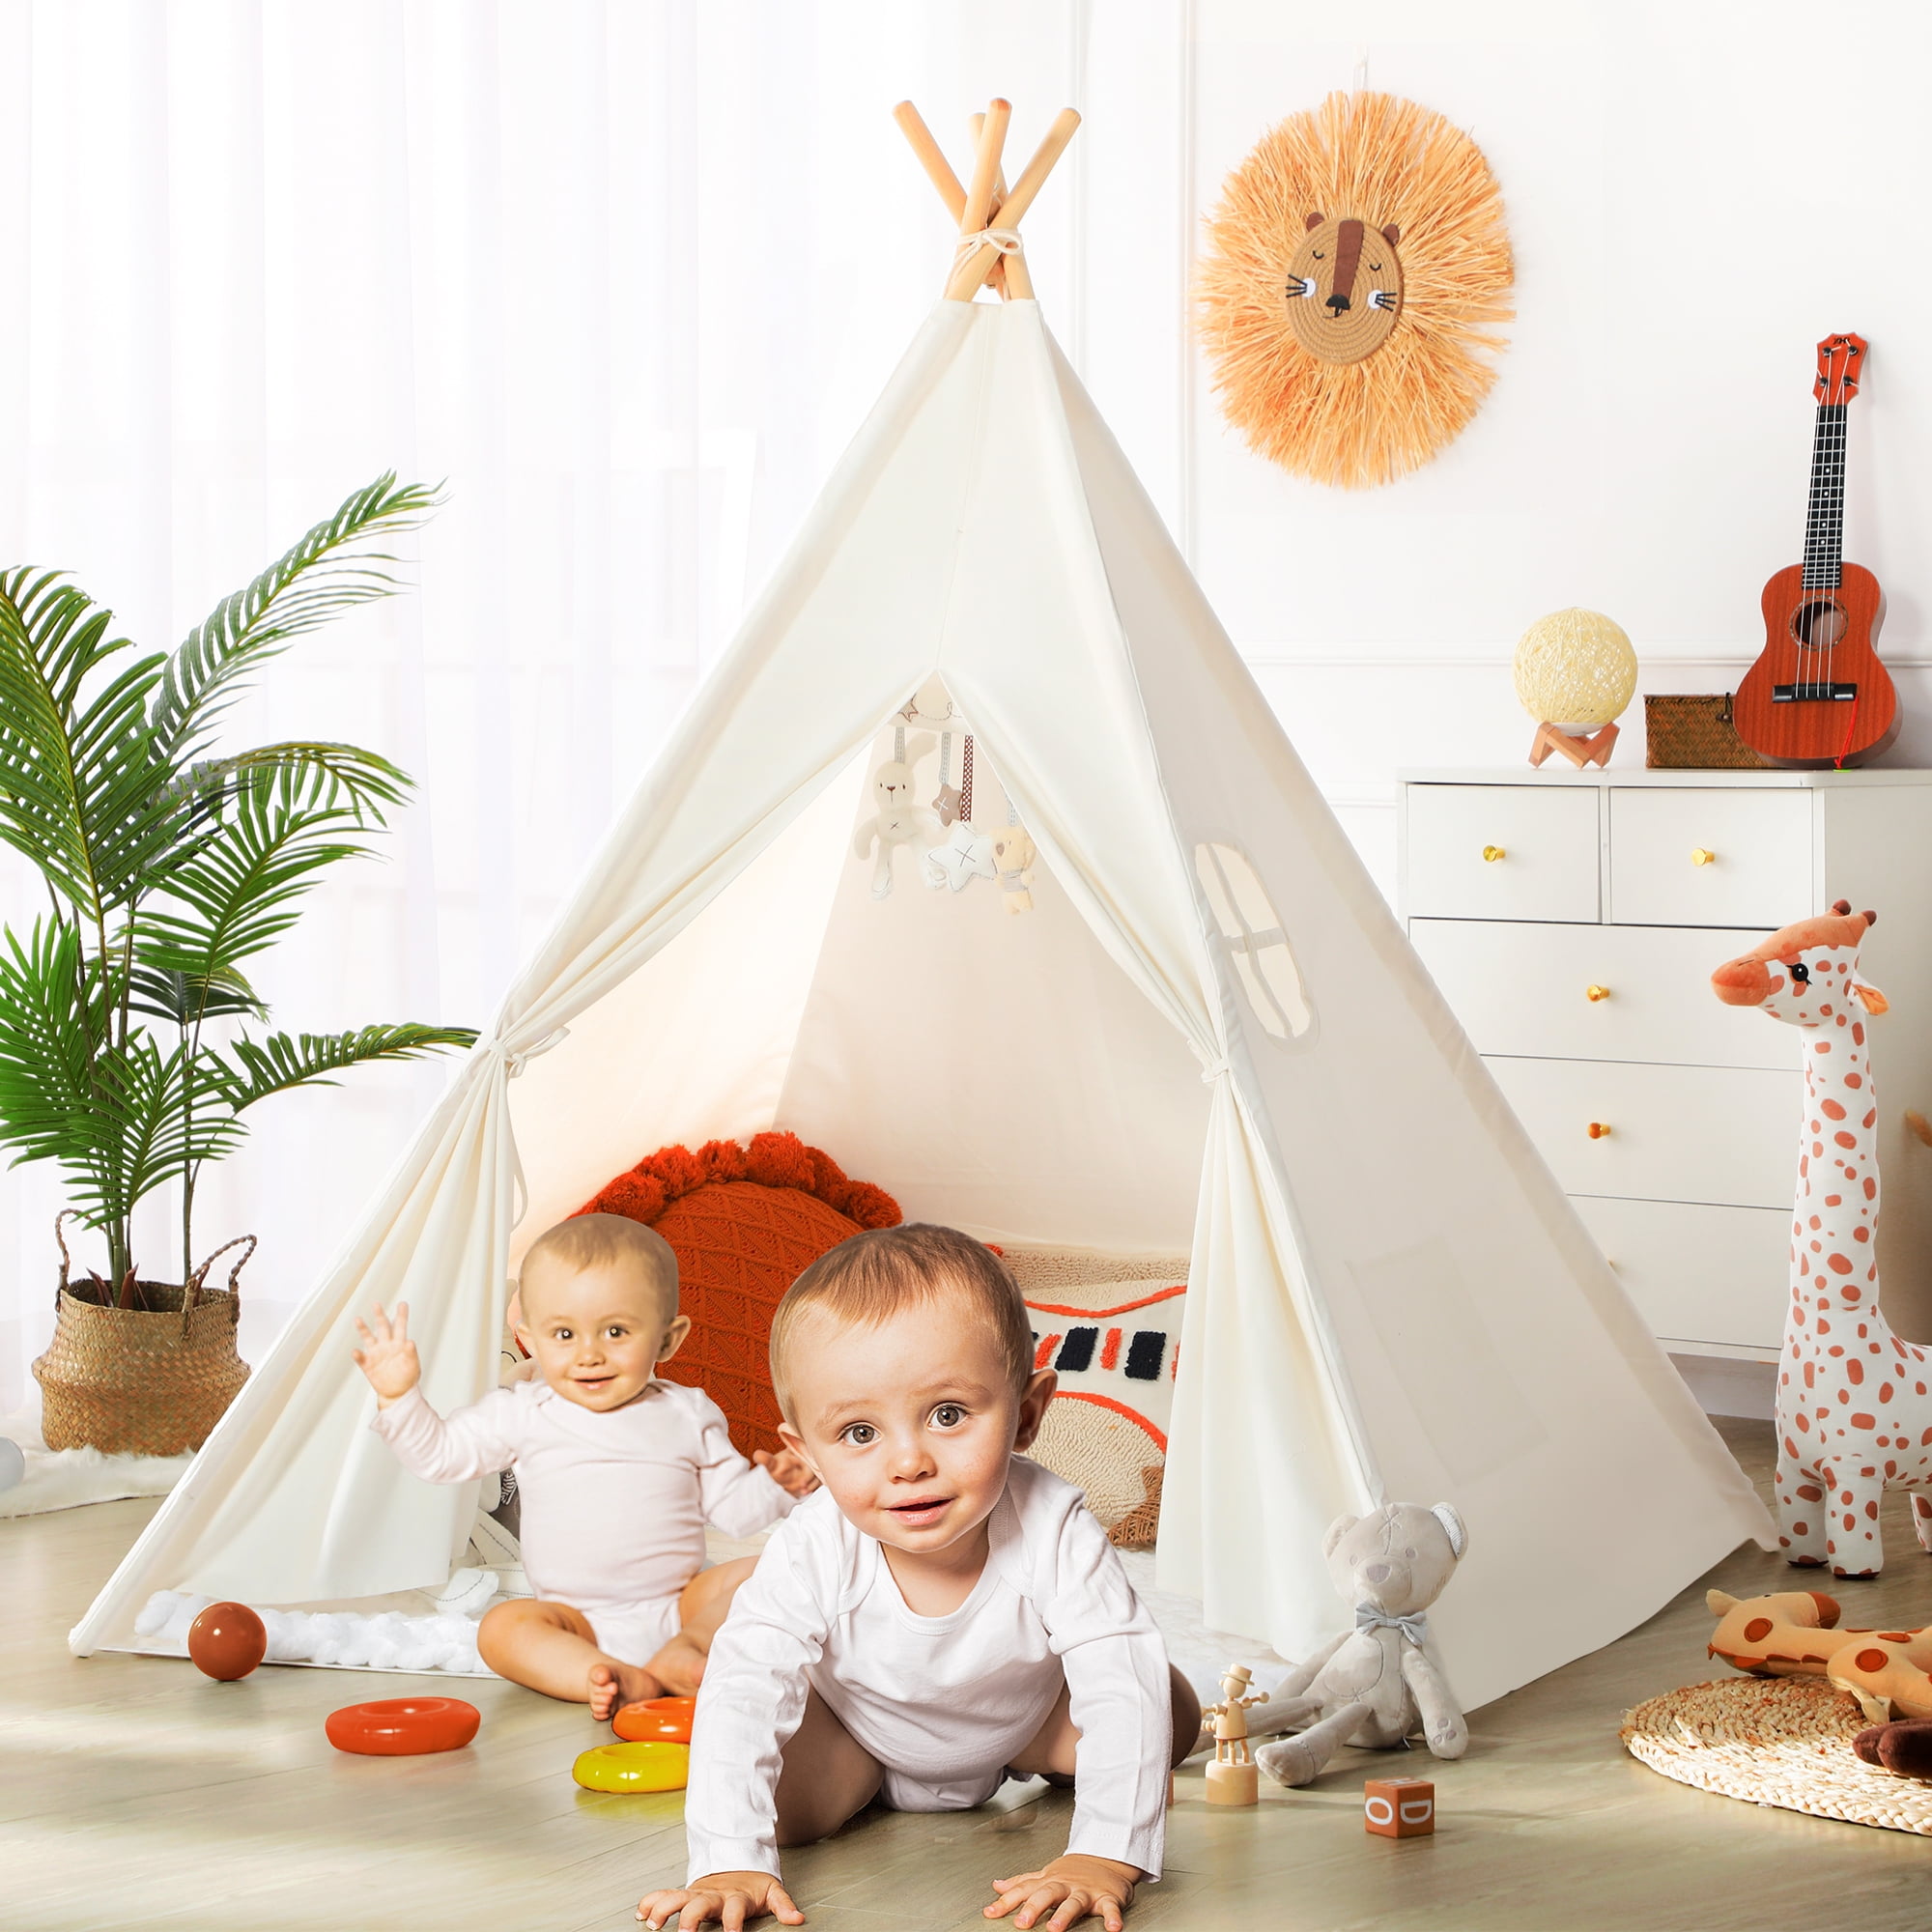 Details about   Kids Lace Teepee Tent Folding Children Playhouse W/ Bag Indoor & Outdoor Play